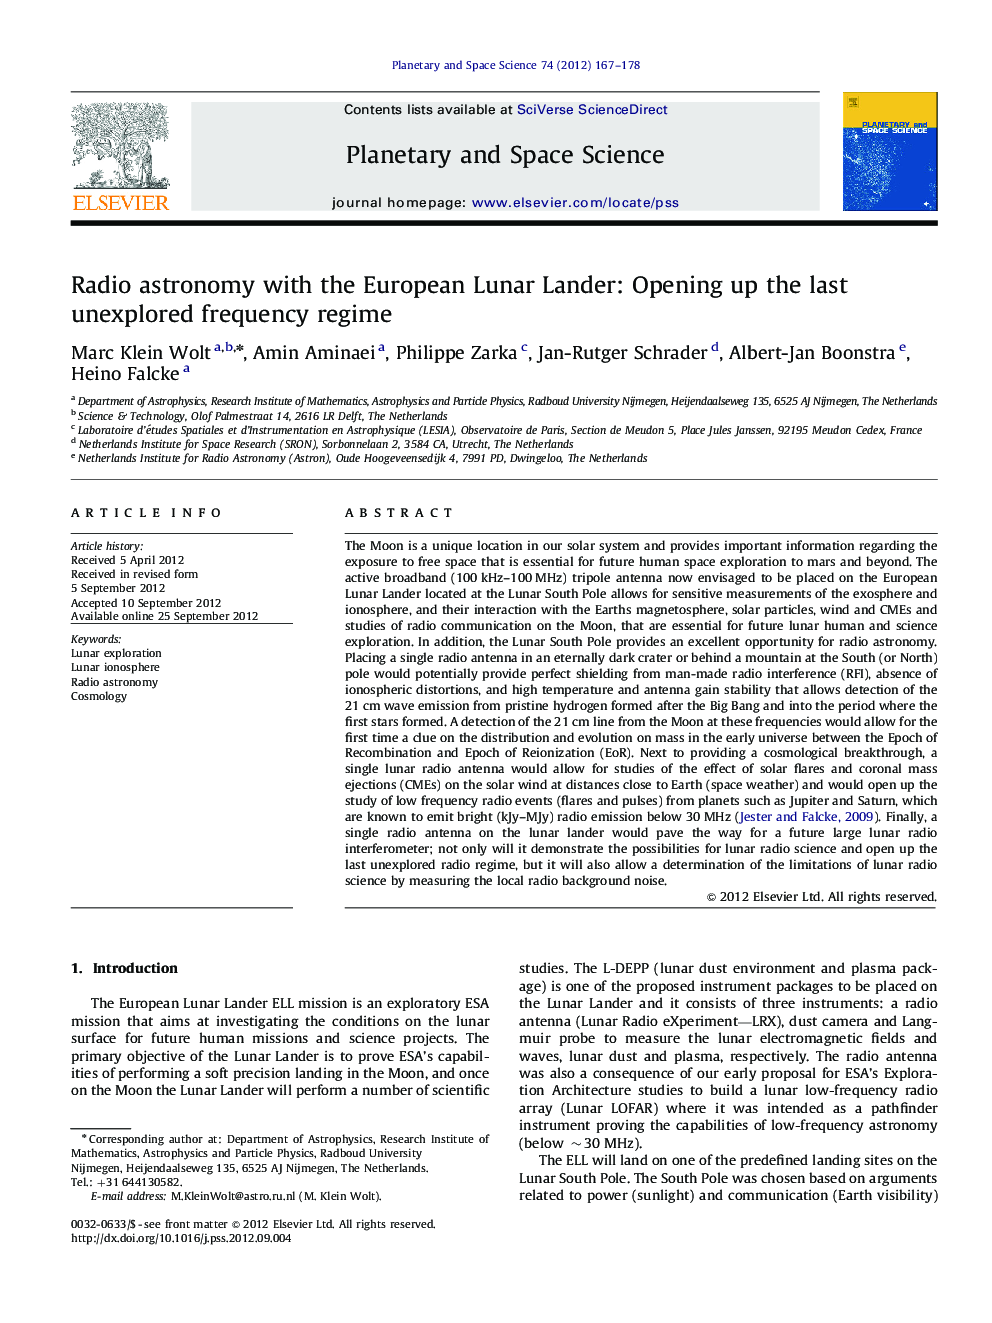 Radio astronomy with the European Lunar Lander: Opening up the last unexplored frequency regime